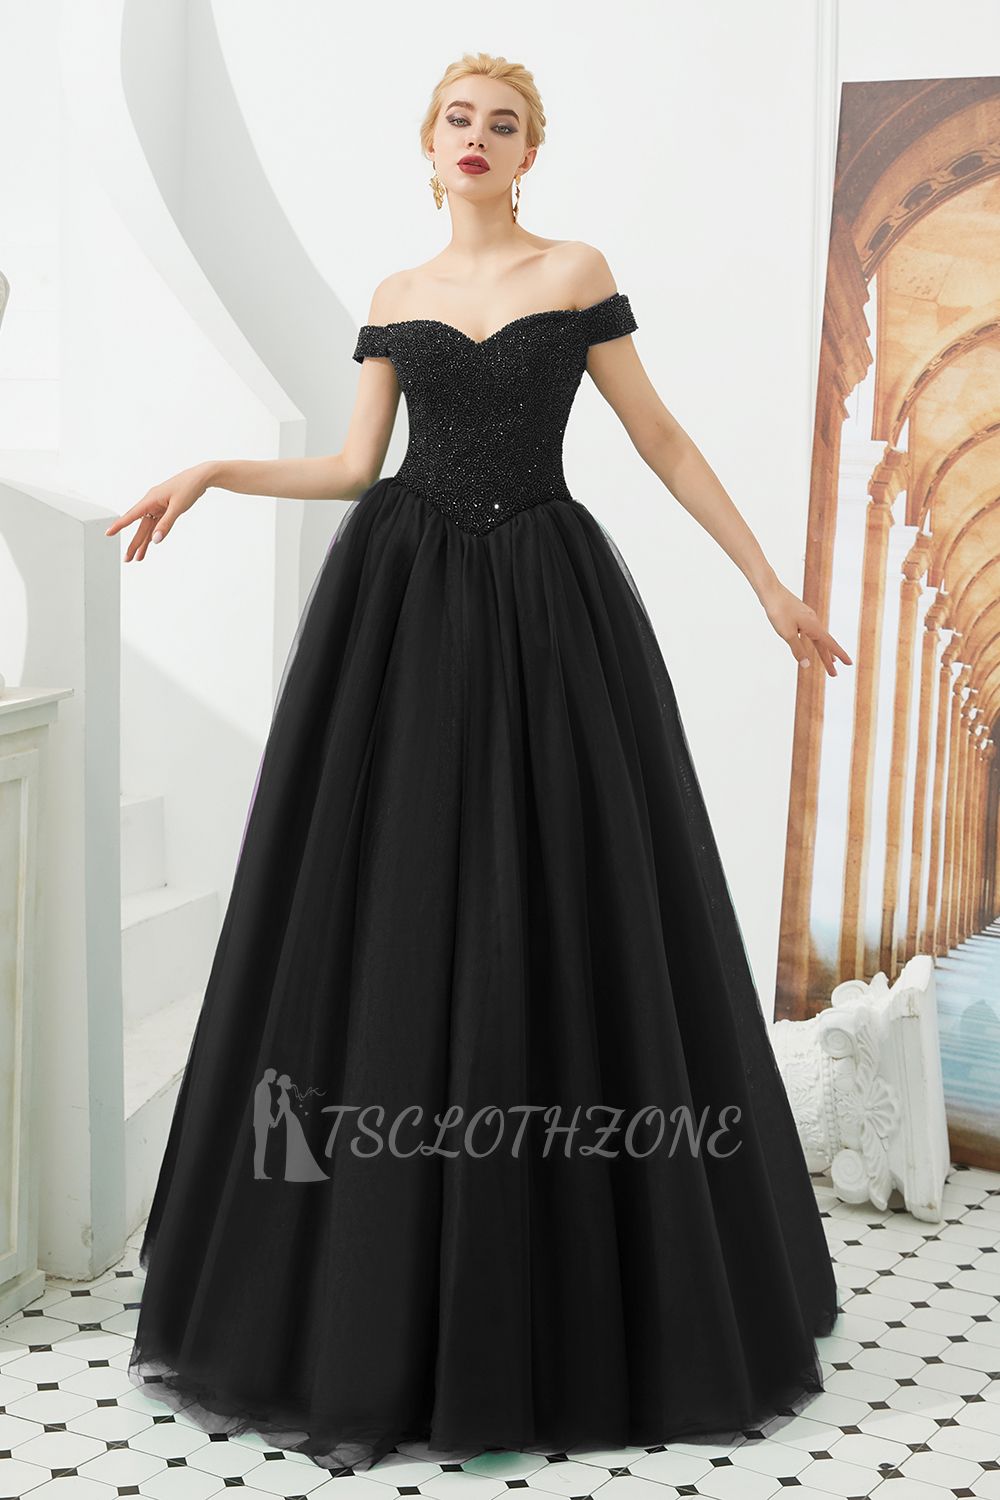 Harry | Elegant Emerald green Off-the-shoulder Ball Gown Dress for Prom/Evening